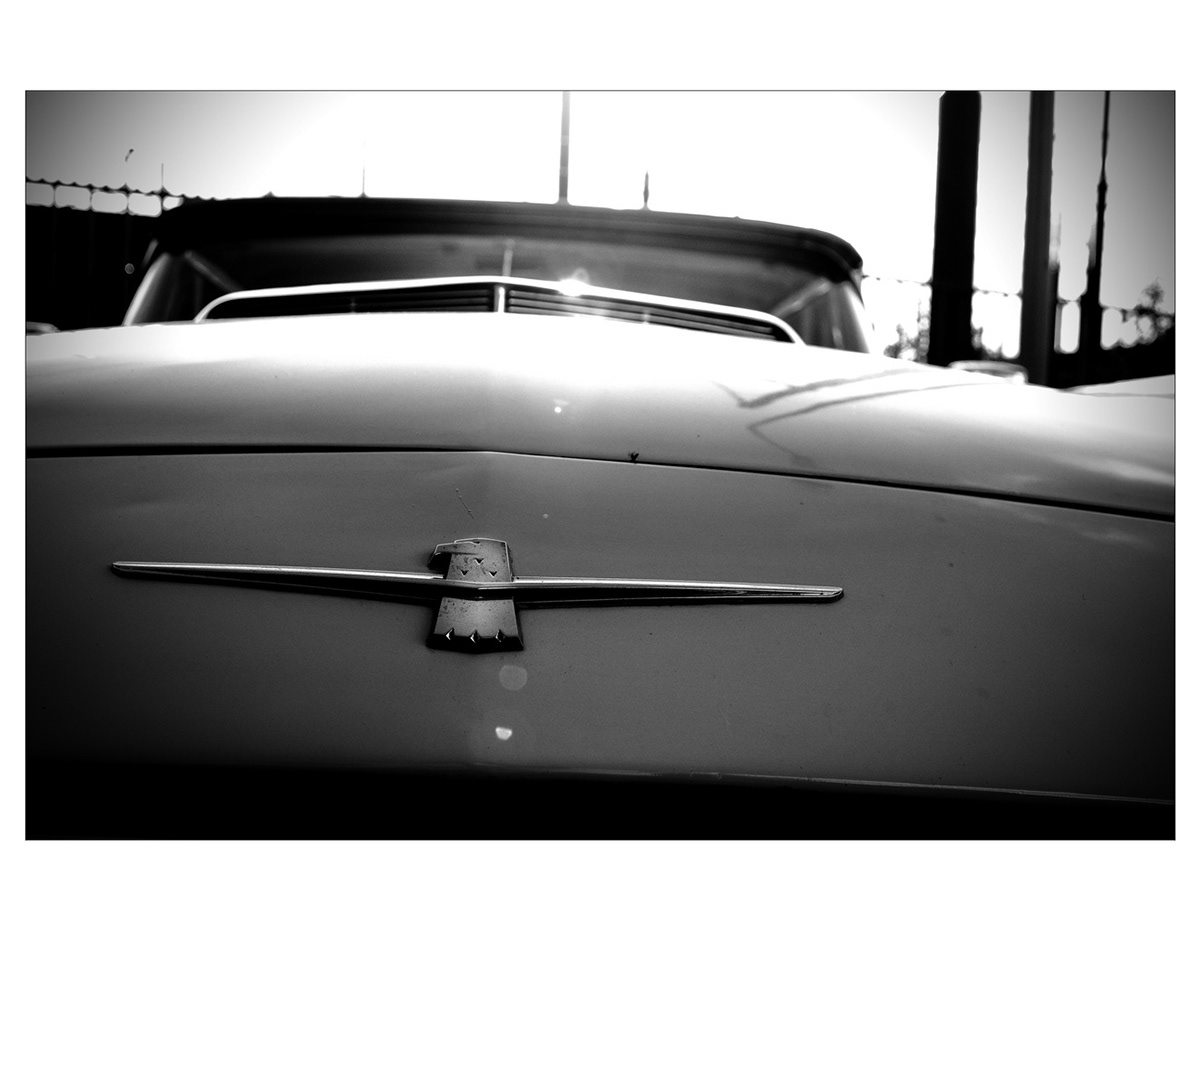 Cars cult power lifestyle wheels americanmuscle blackandwhitephotography cruisebrothers DenHaag oldtimers